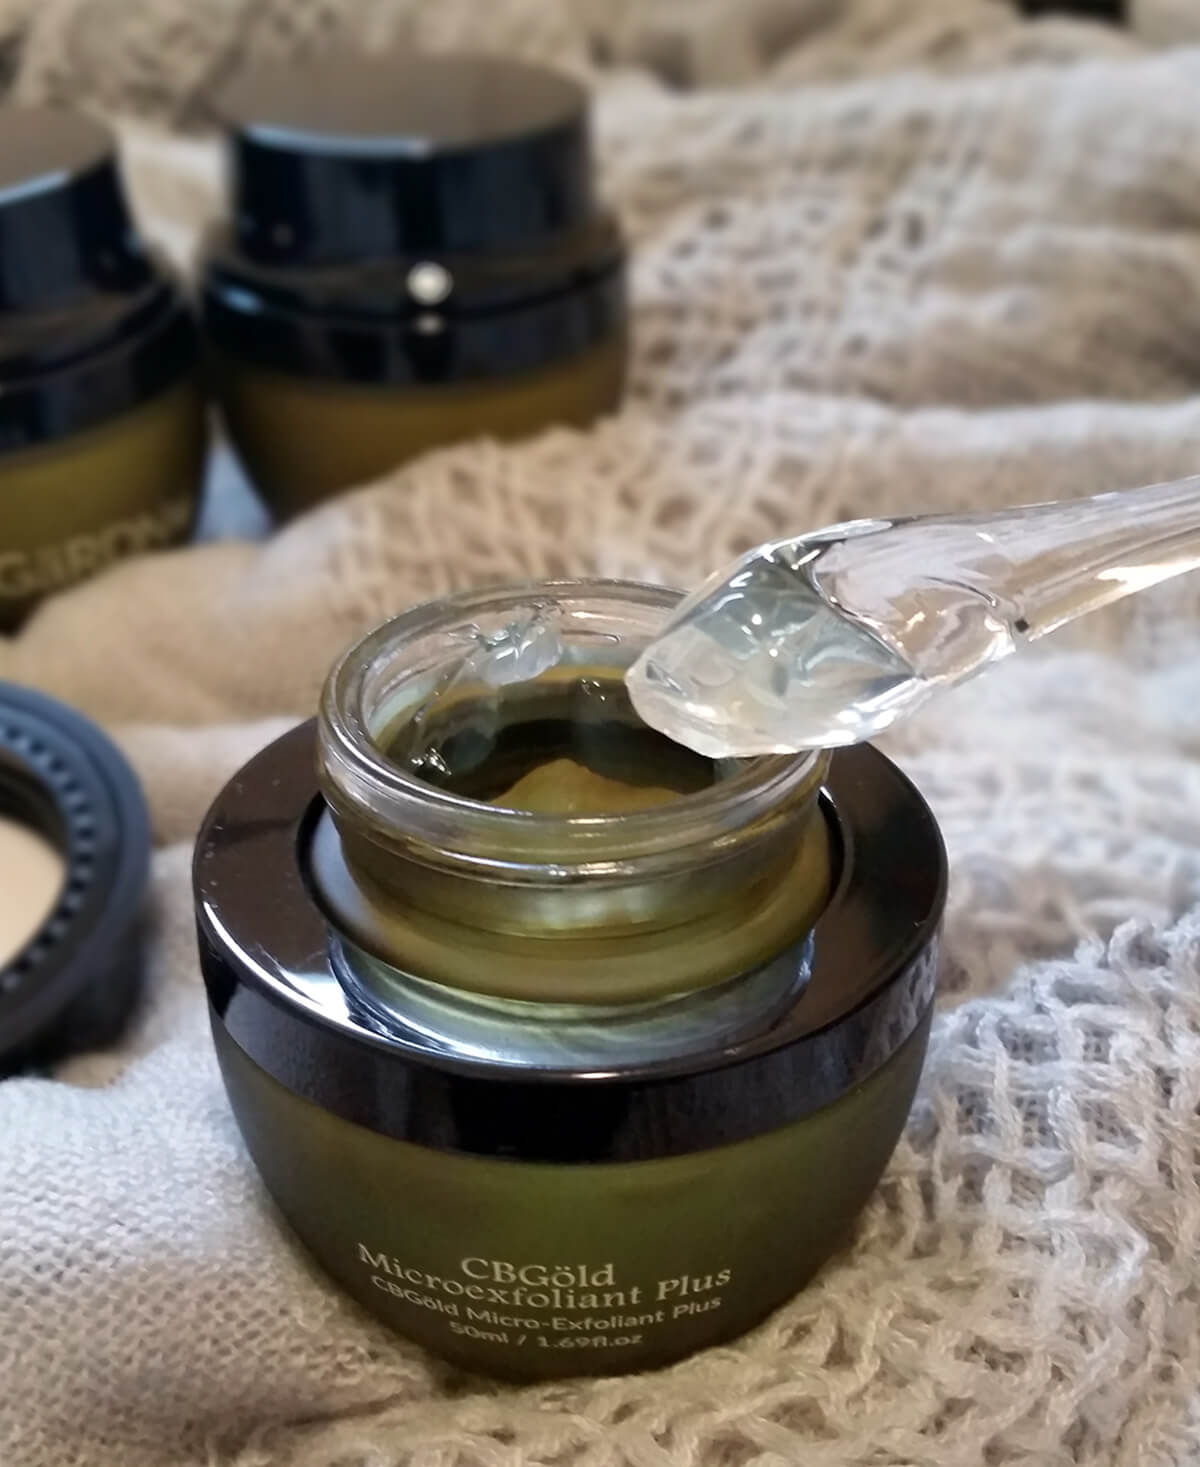 CBGold Exfoliant in jar with applicator lifting product out